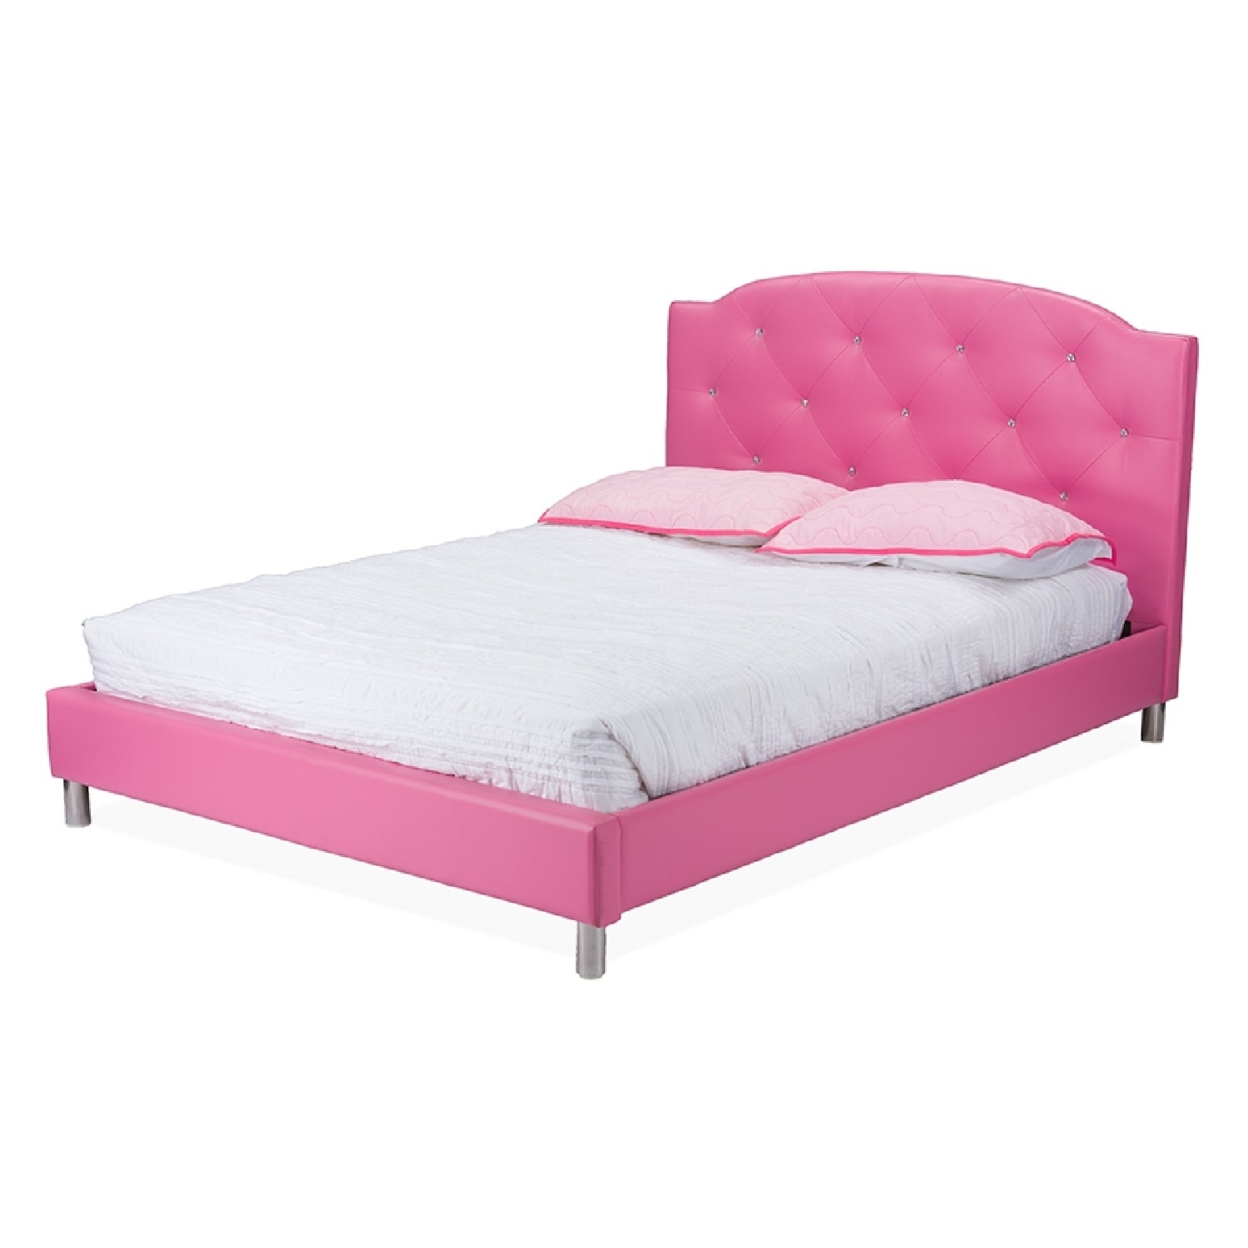 Baxton Studio Canterbury Contemporary Glam Pink Faux Leather Upholstered Full Size 3-Piece Bedroom Set